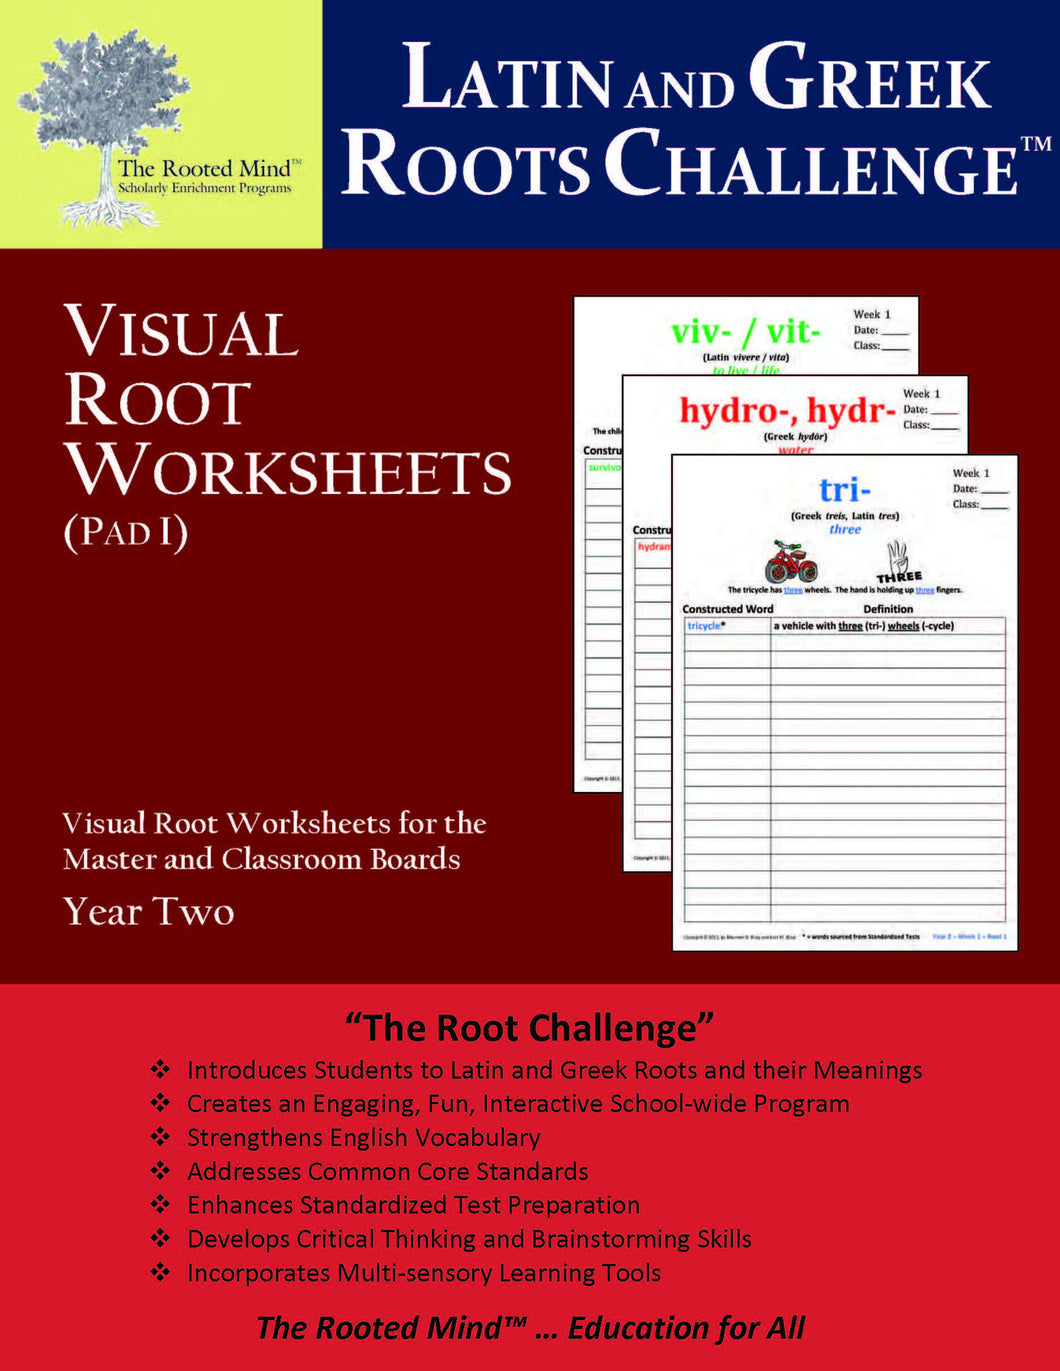 Latin and Greek Roots Challenge - Visual Root Worksheets (Pad I) - Year 2